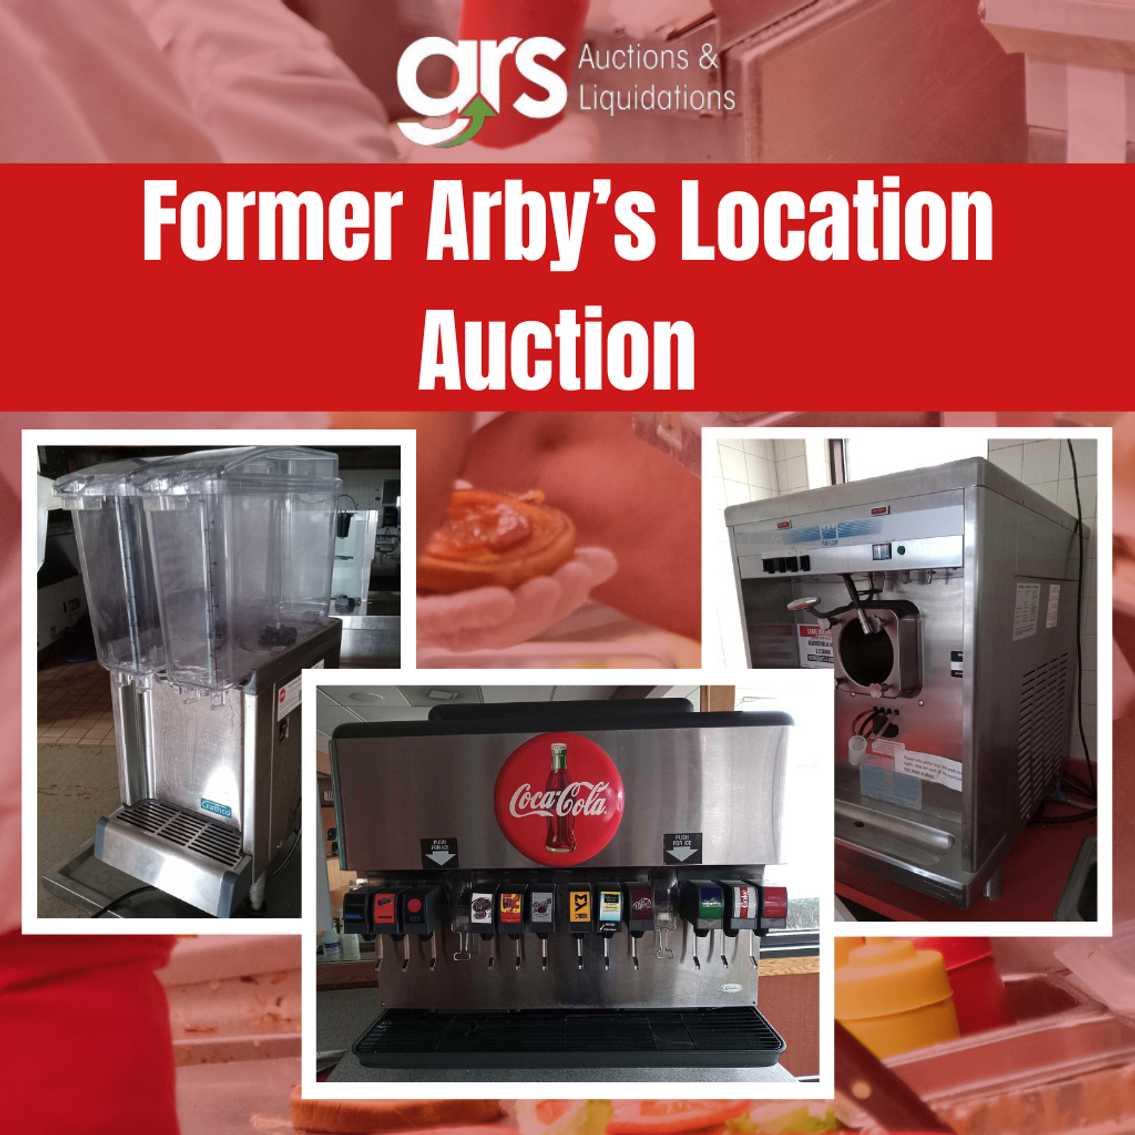 Former Arby's Location Auction